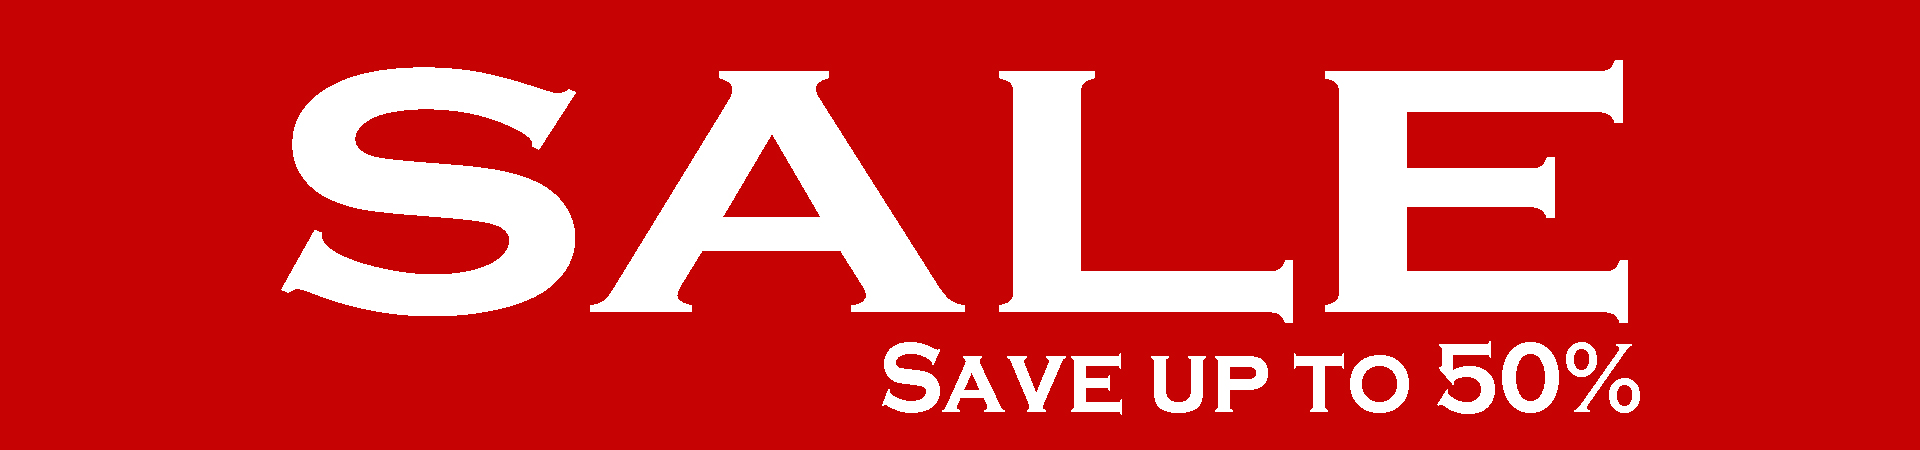 SALE Save up to 50%